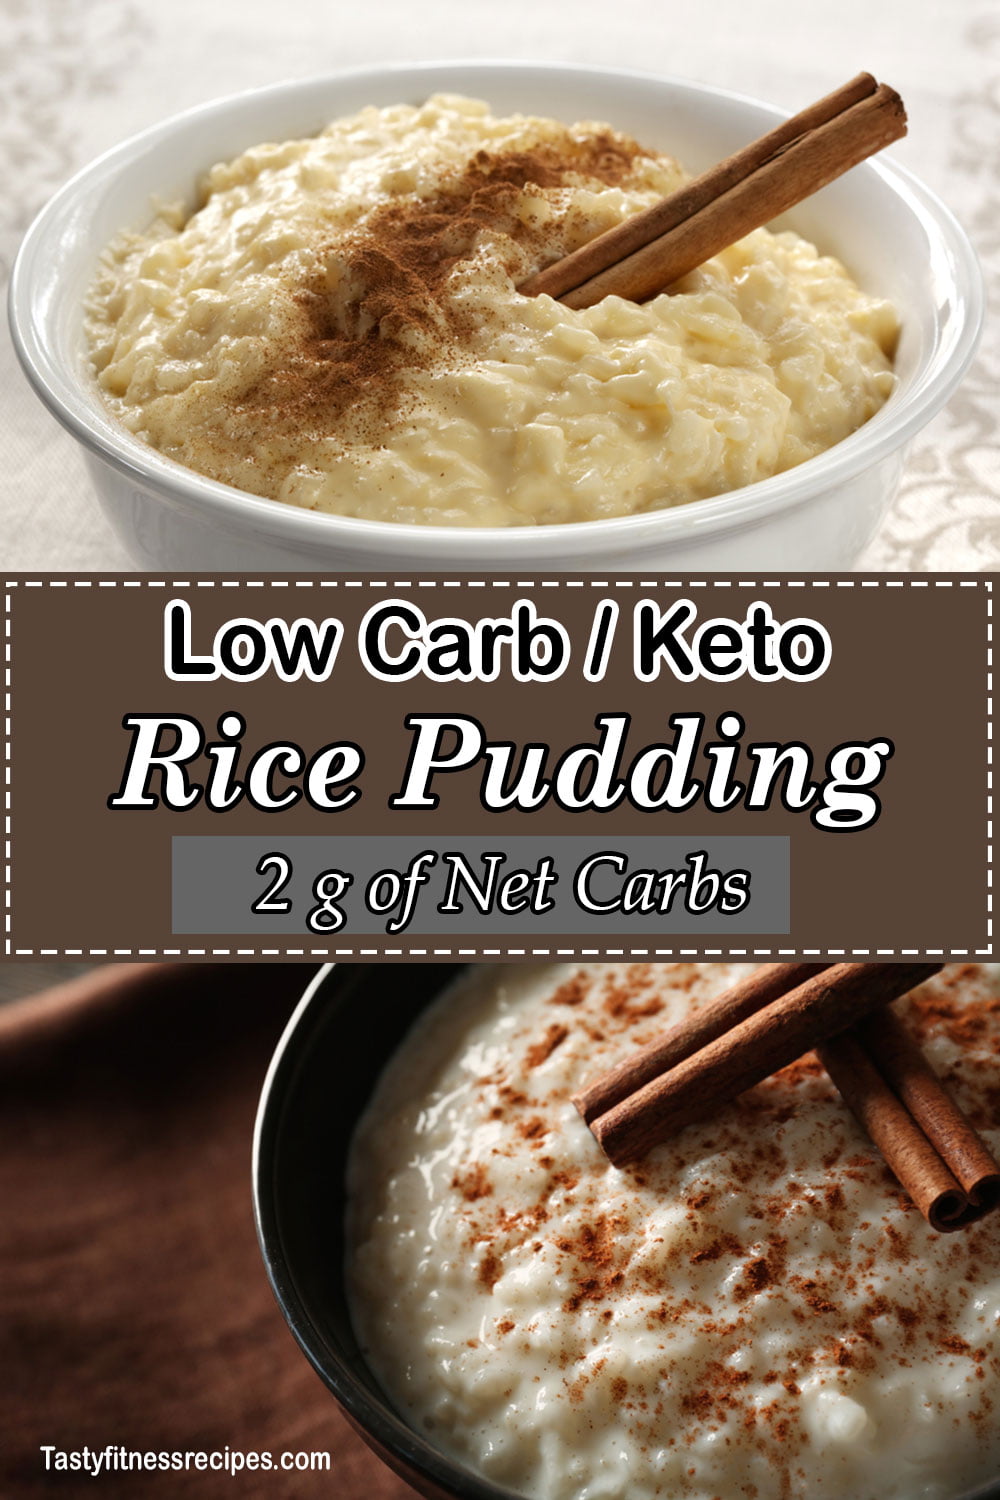 Low carb Keto Rice Pudding